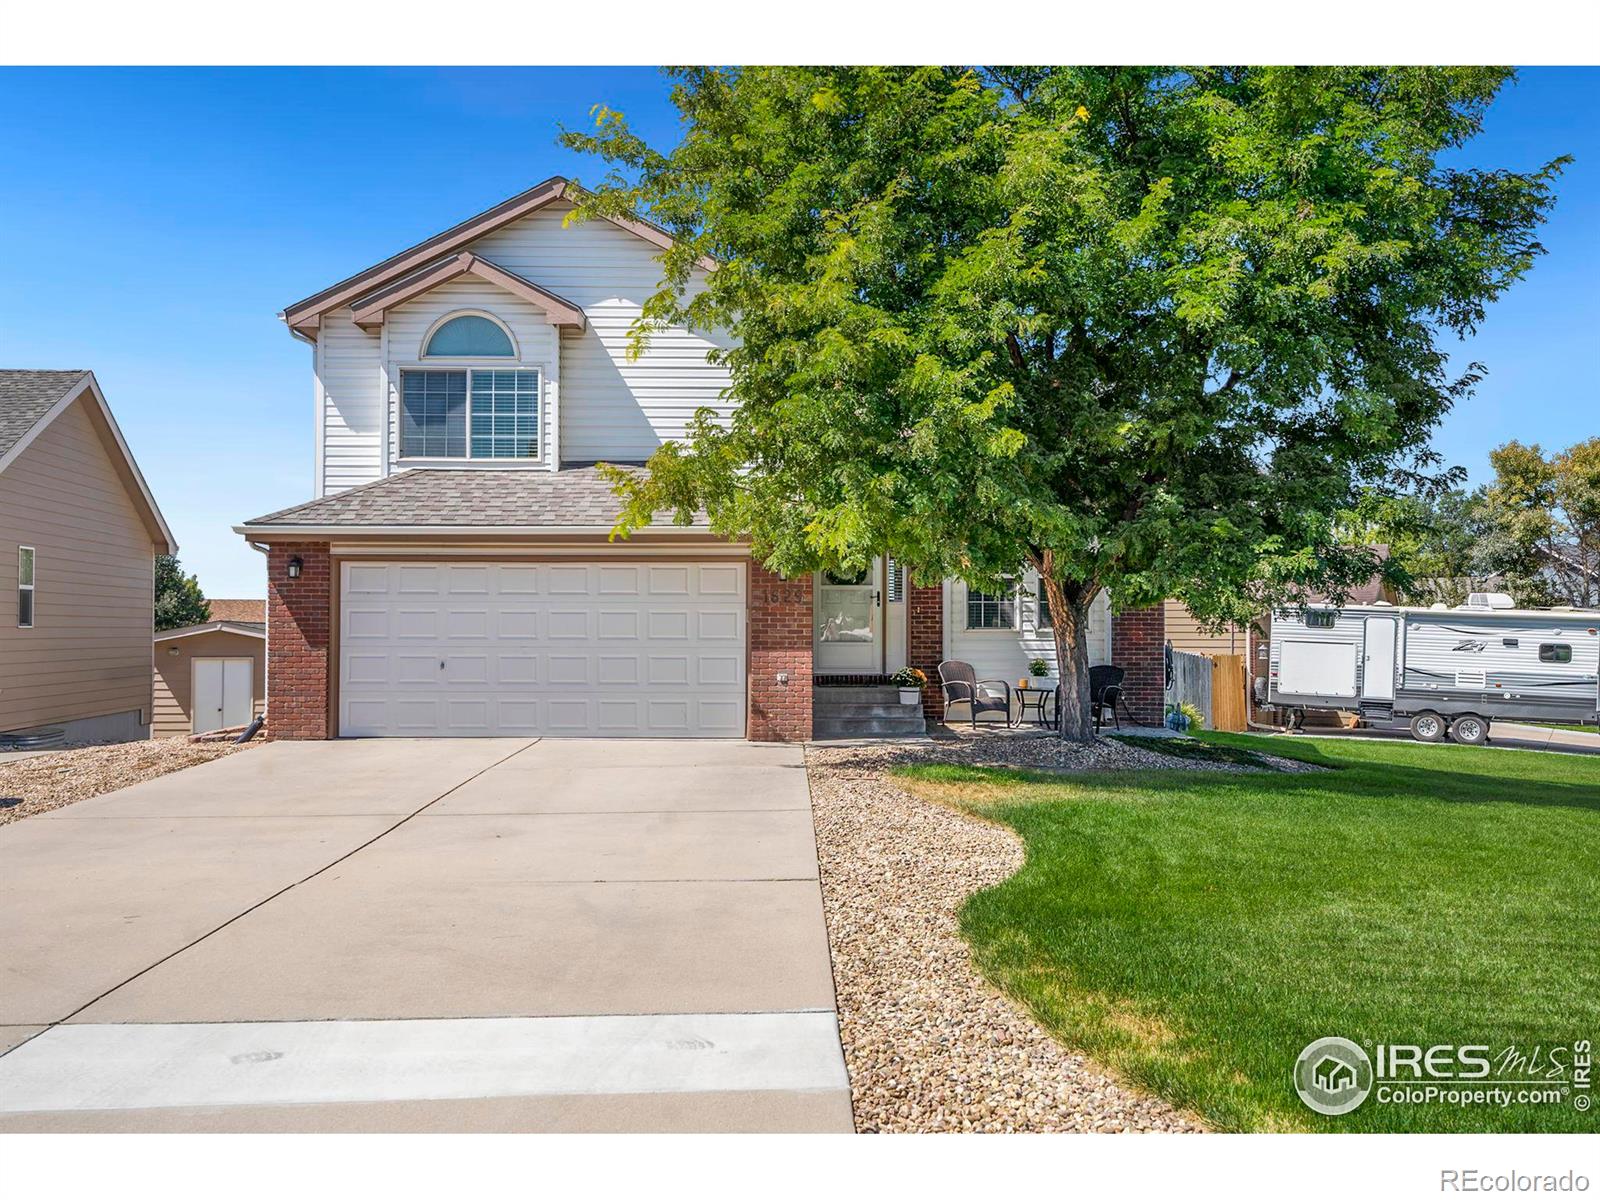 1629  58th Avenue, greeley MLS: 123456789995655 Beds: 4 Baths: 3 Price: $419,900